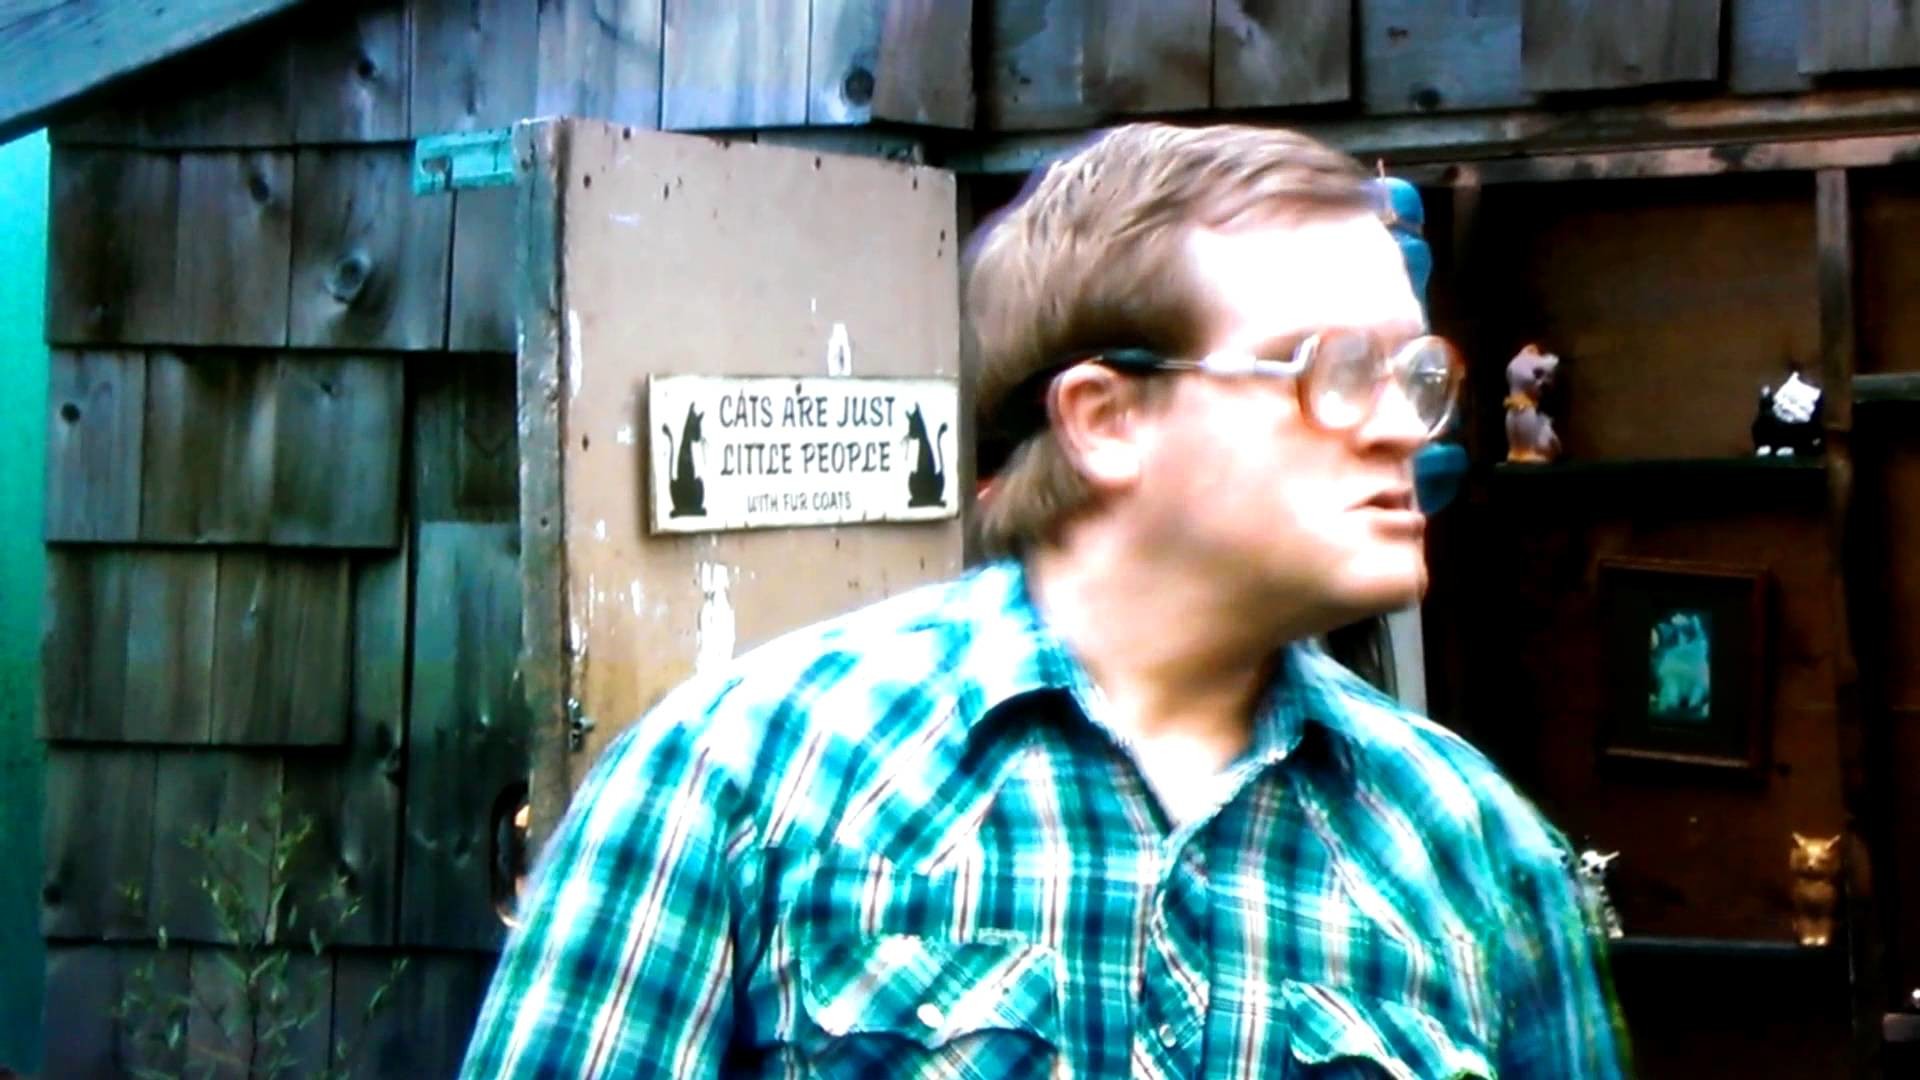 Trailer Park Boys Bubbles… Here come kitty come kitty come kitty – YouTube